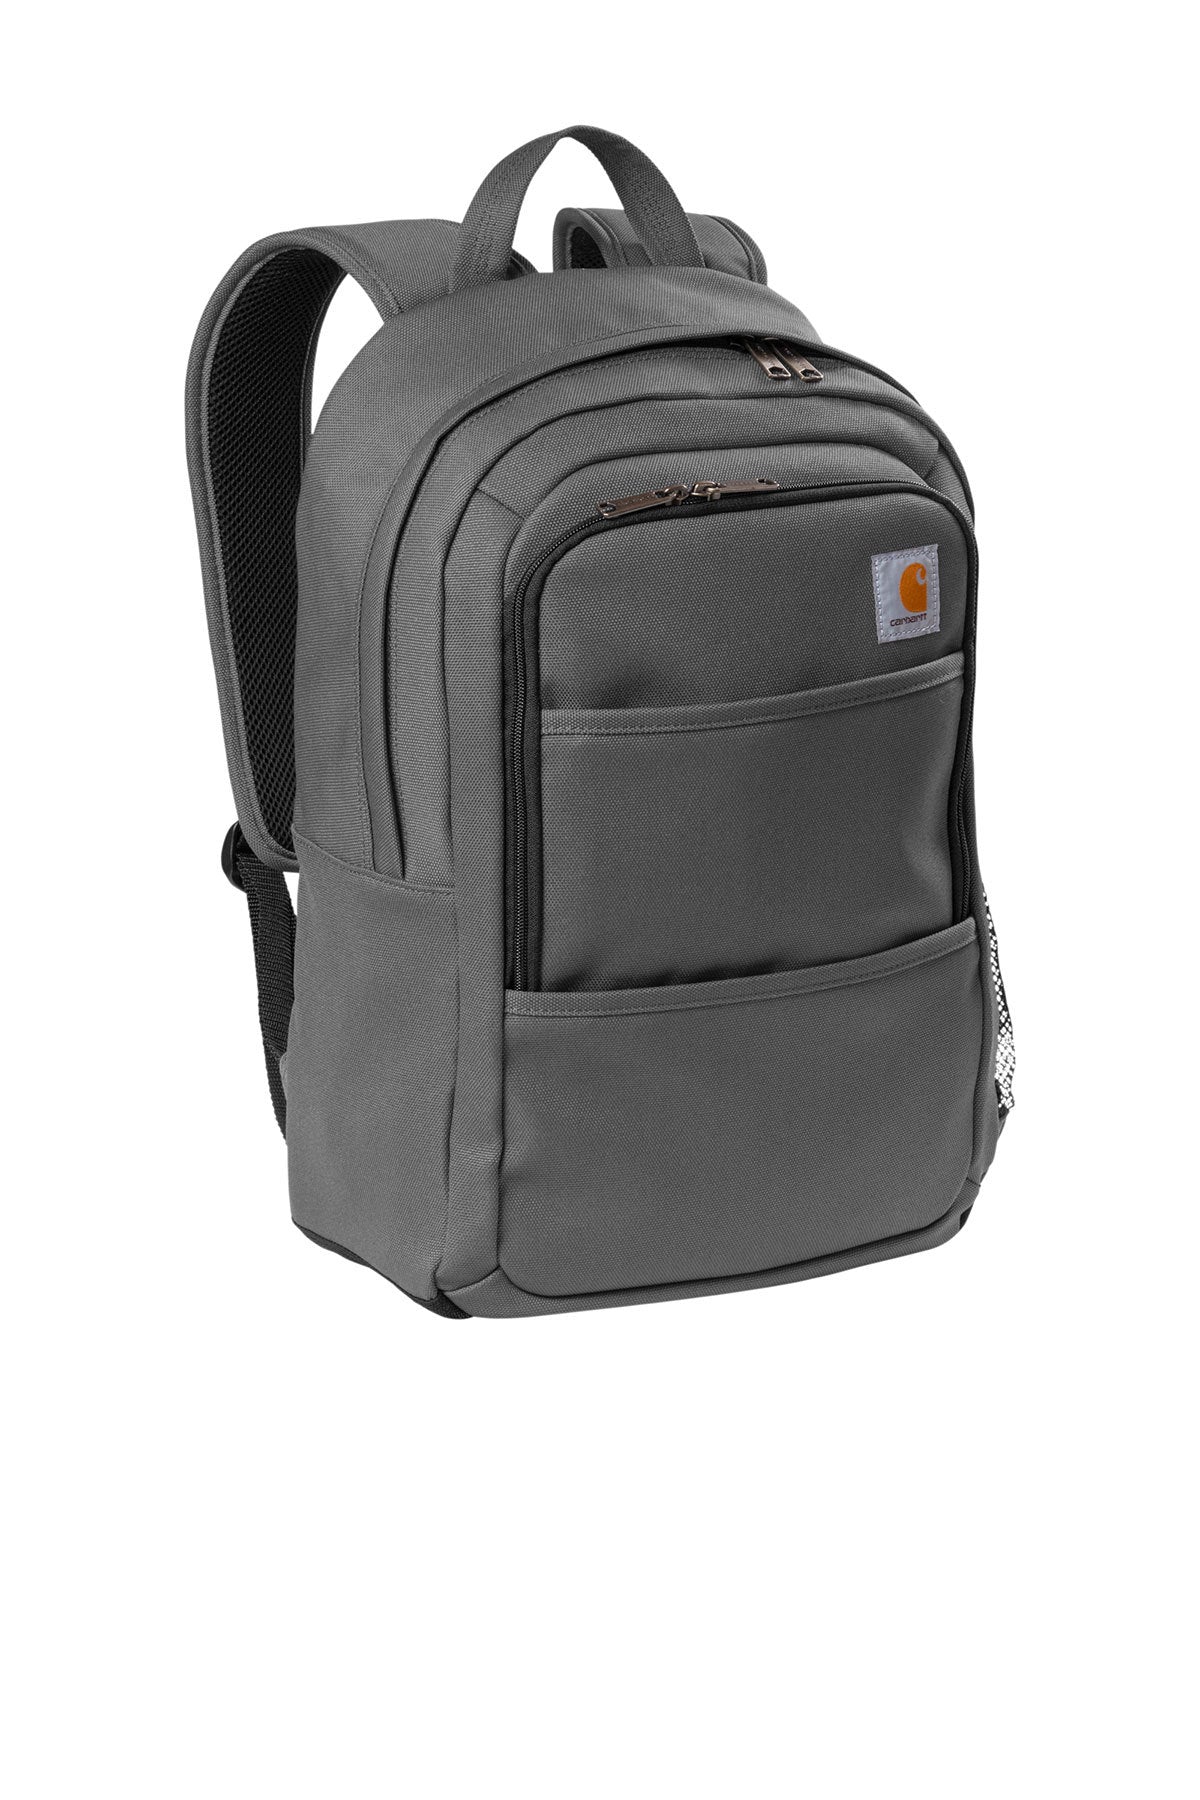 CT89350303 Carhartt Foundry Series Backpack